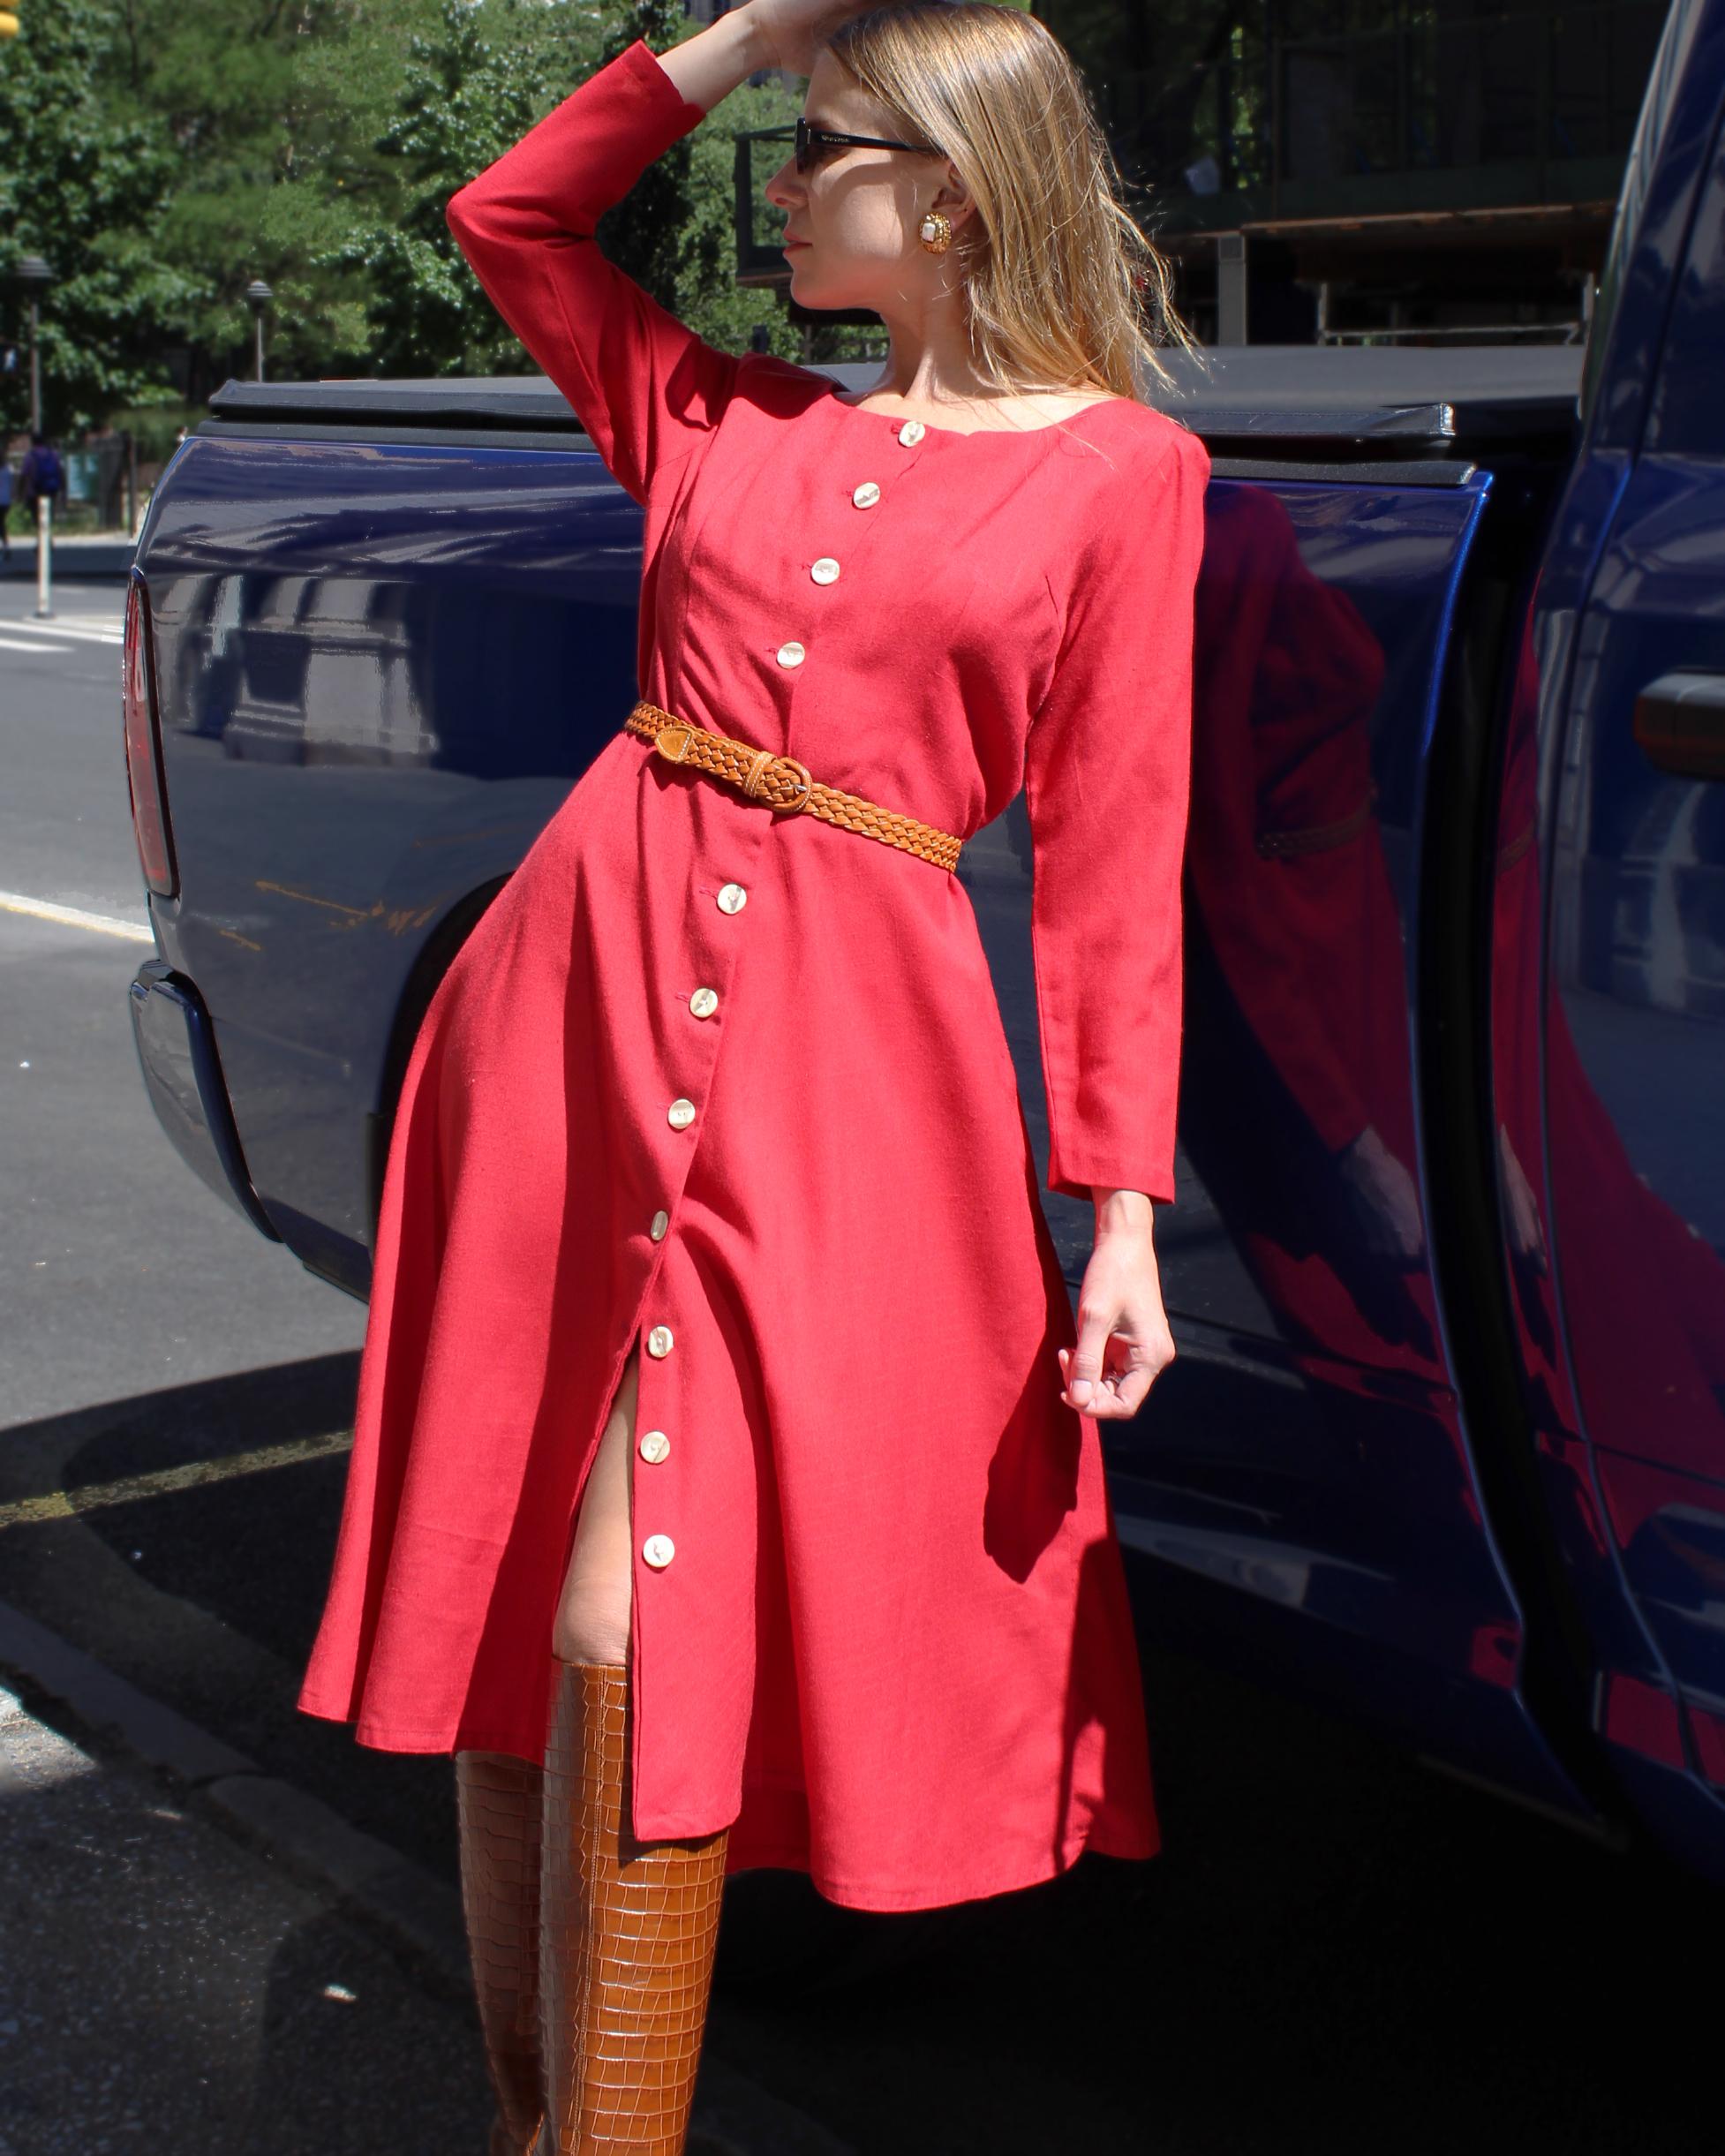 This classic 1950s shirtdress is a much welcome fresh breath of feminine style. The dress is a great example of Dior's 